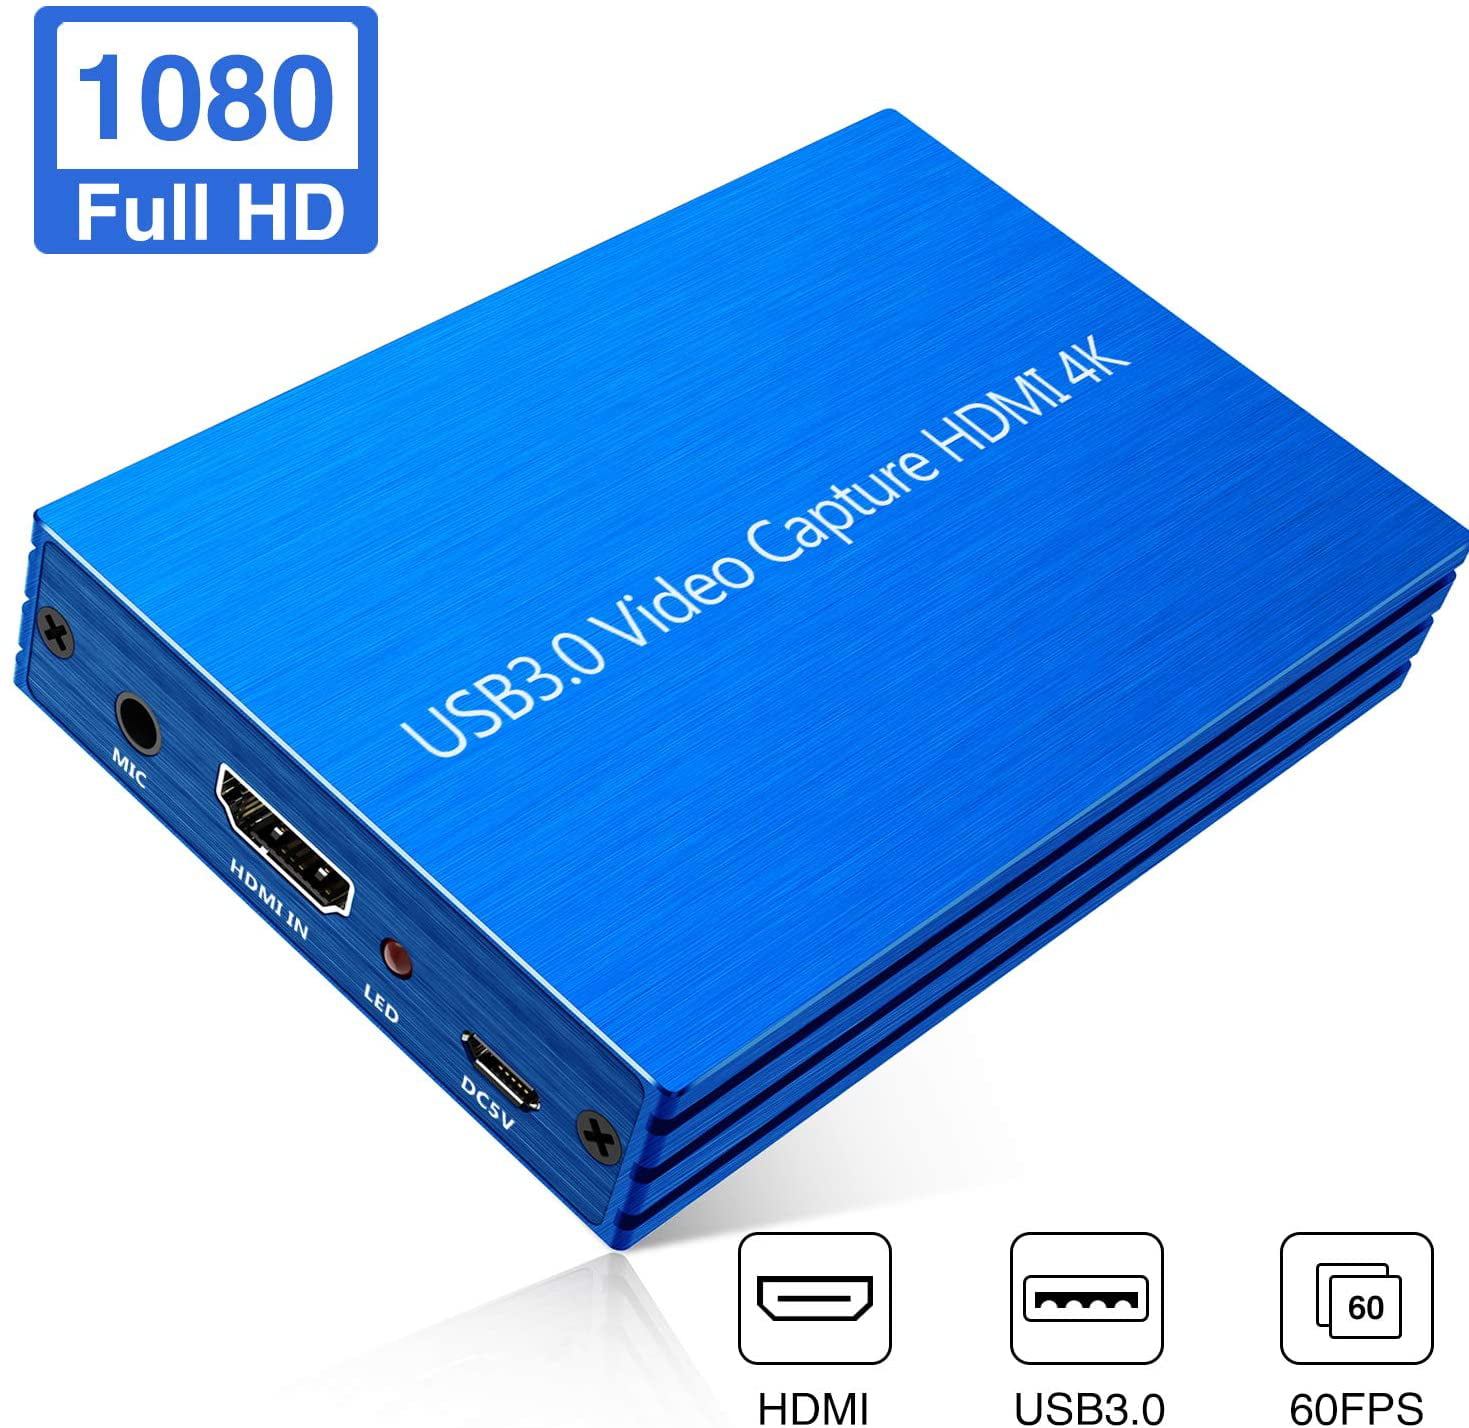 BEESCLOVER 1080P 60FPS HDMI USB3.0 Drive-Free Capture Card Box Video Capture for Windows Linux OS X System Dongle Black 20cm One Size 